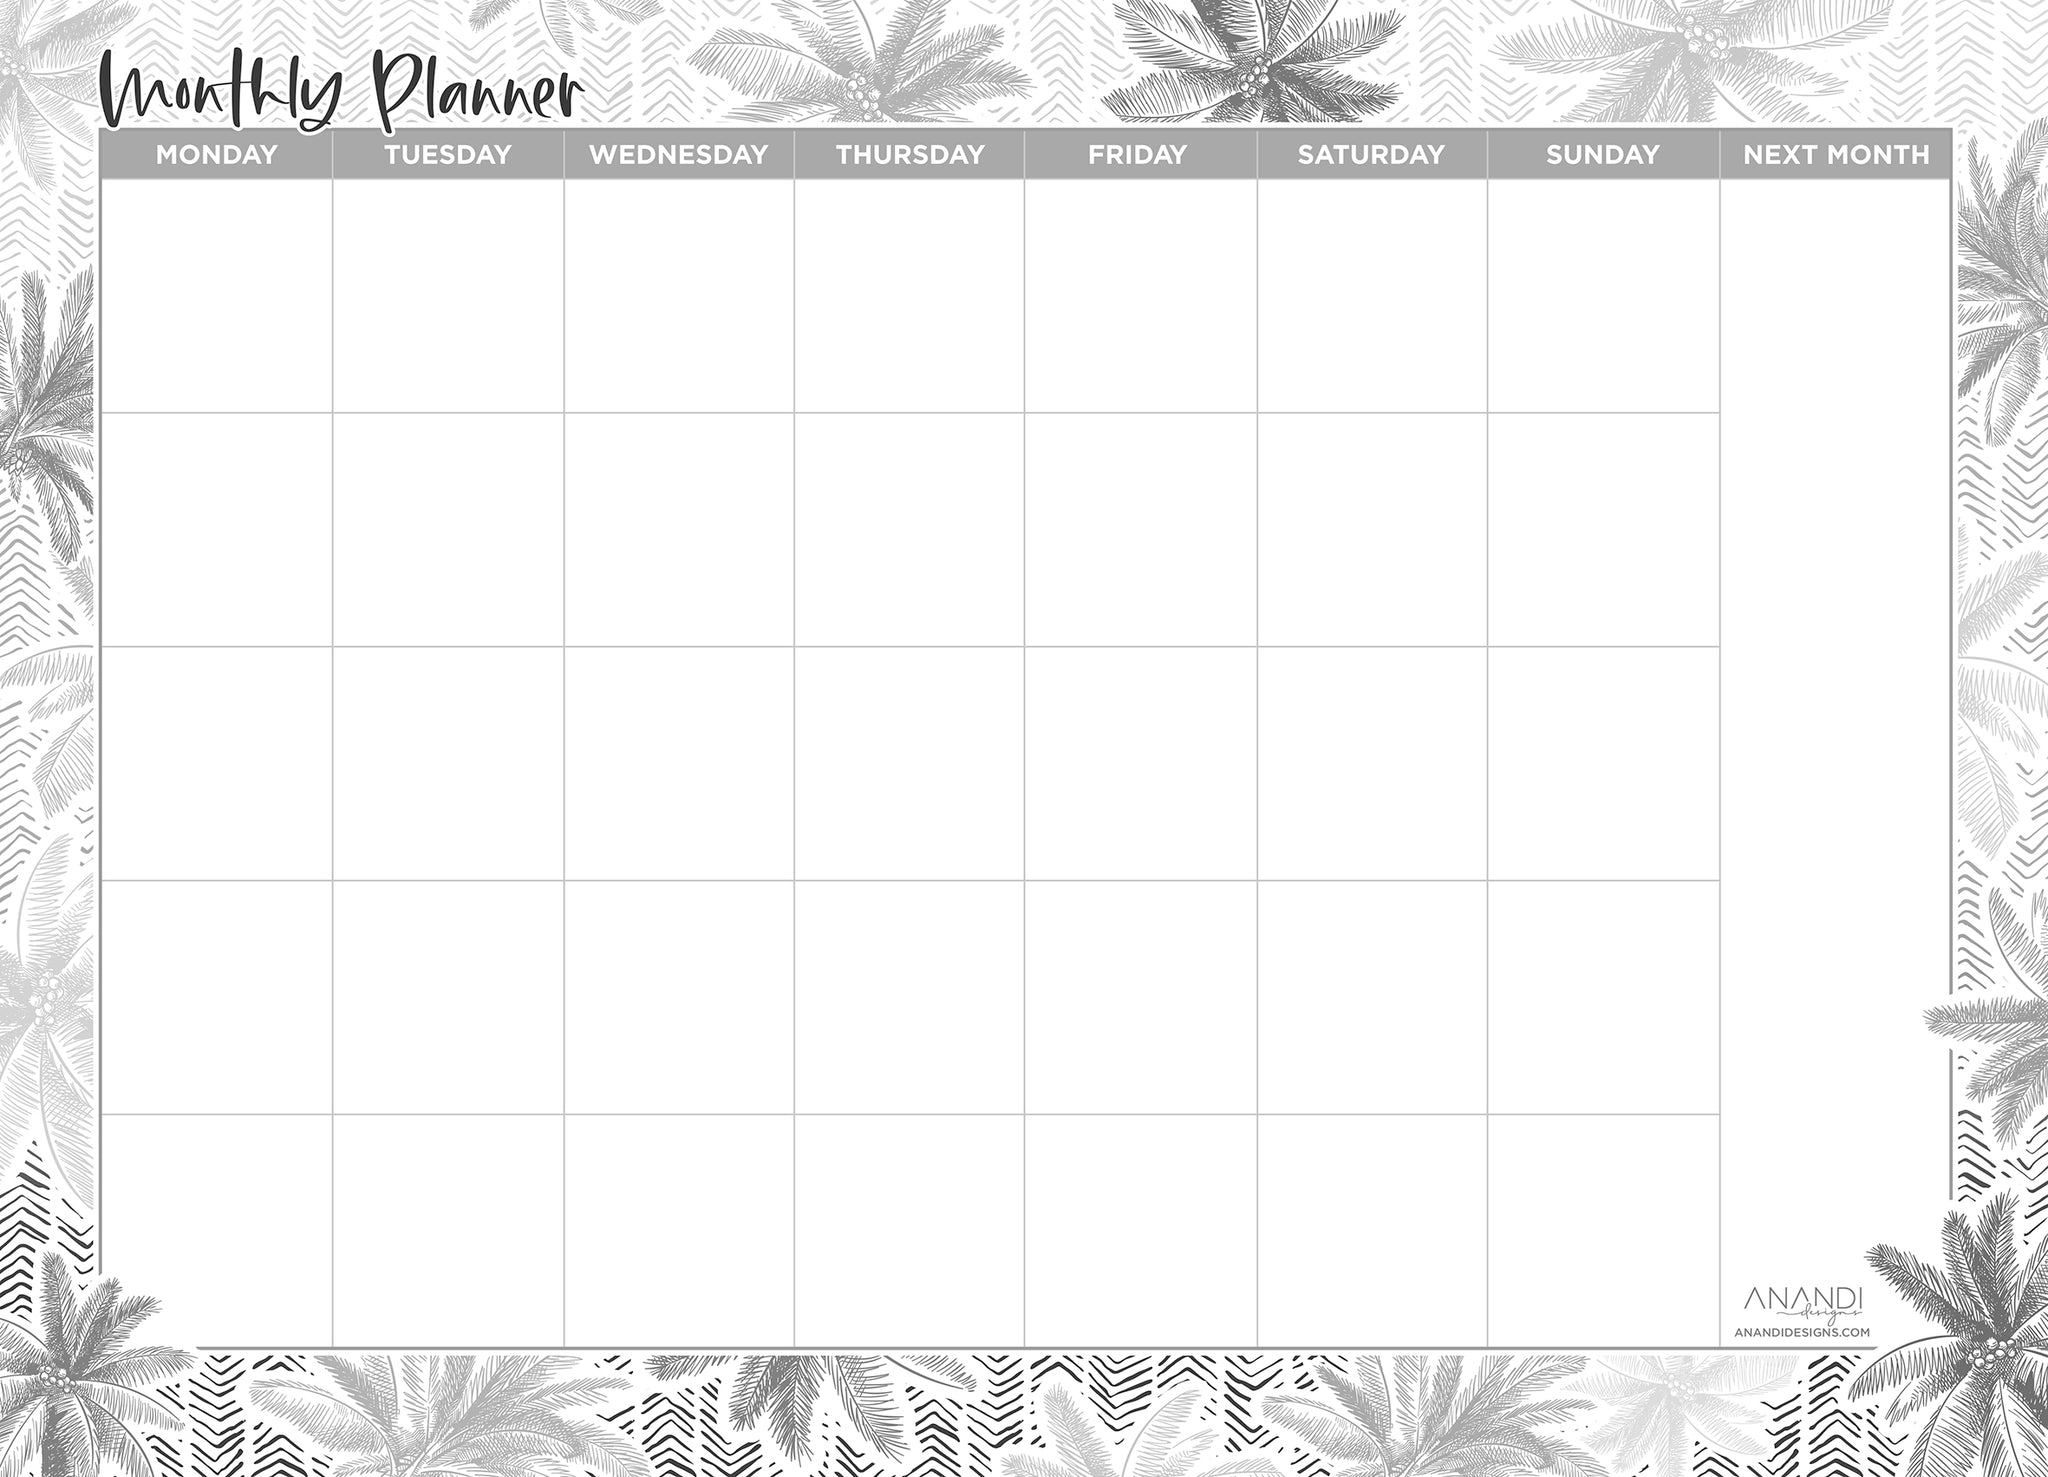 Magnetic Monthly Planner - Palm Cove (LARGE 43cm x 31cm)